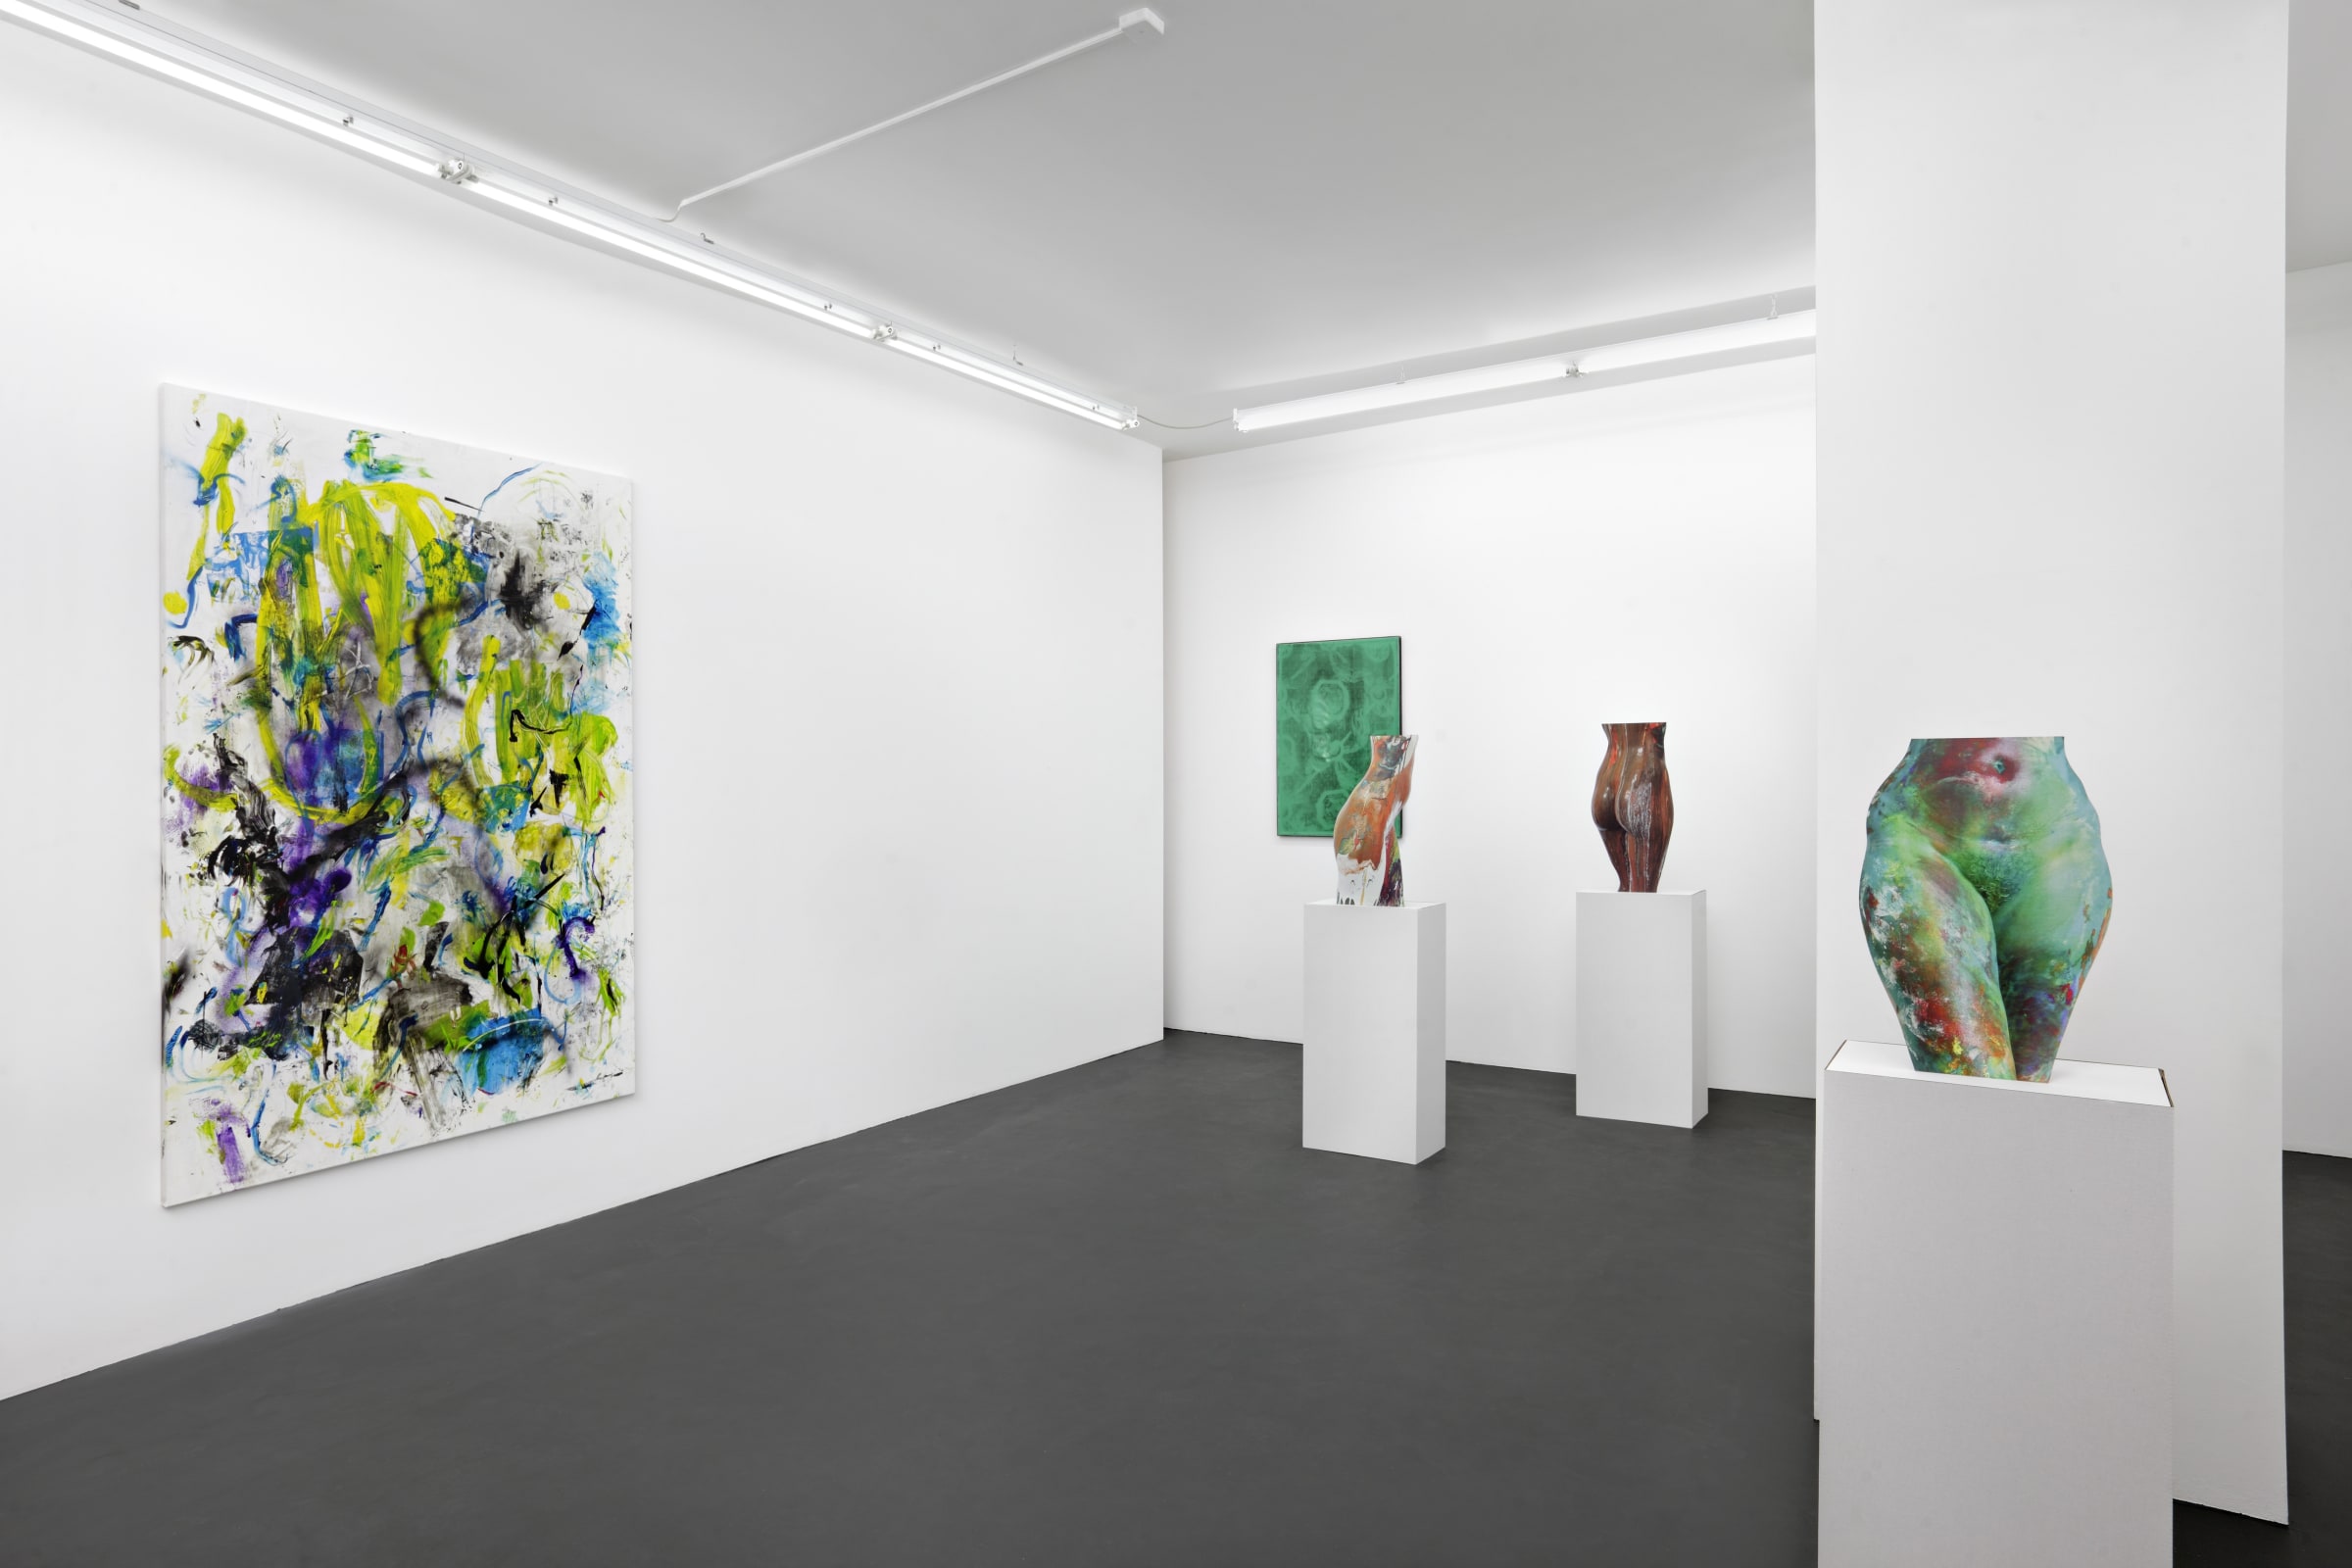 Group Show Sticks and Stones Installation View August 9 – September 2, 2011 Peres Projects, Berlin